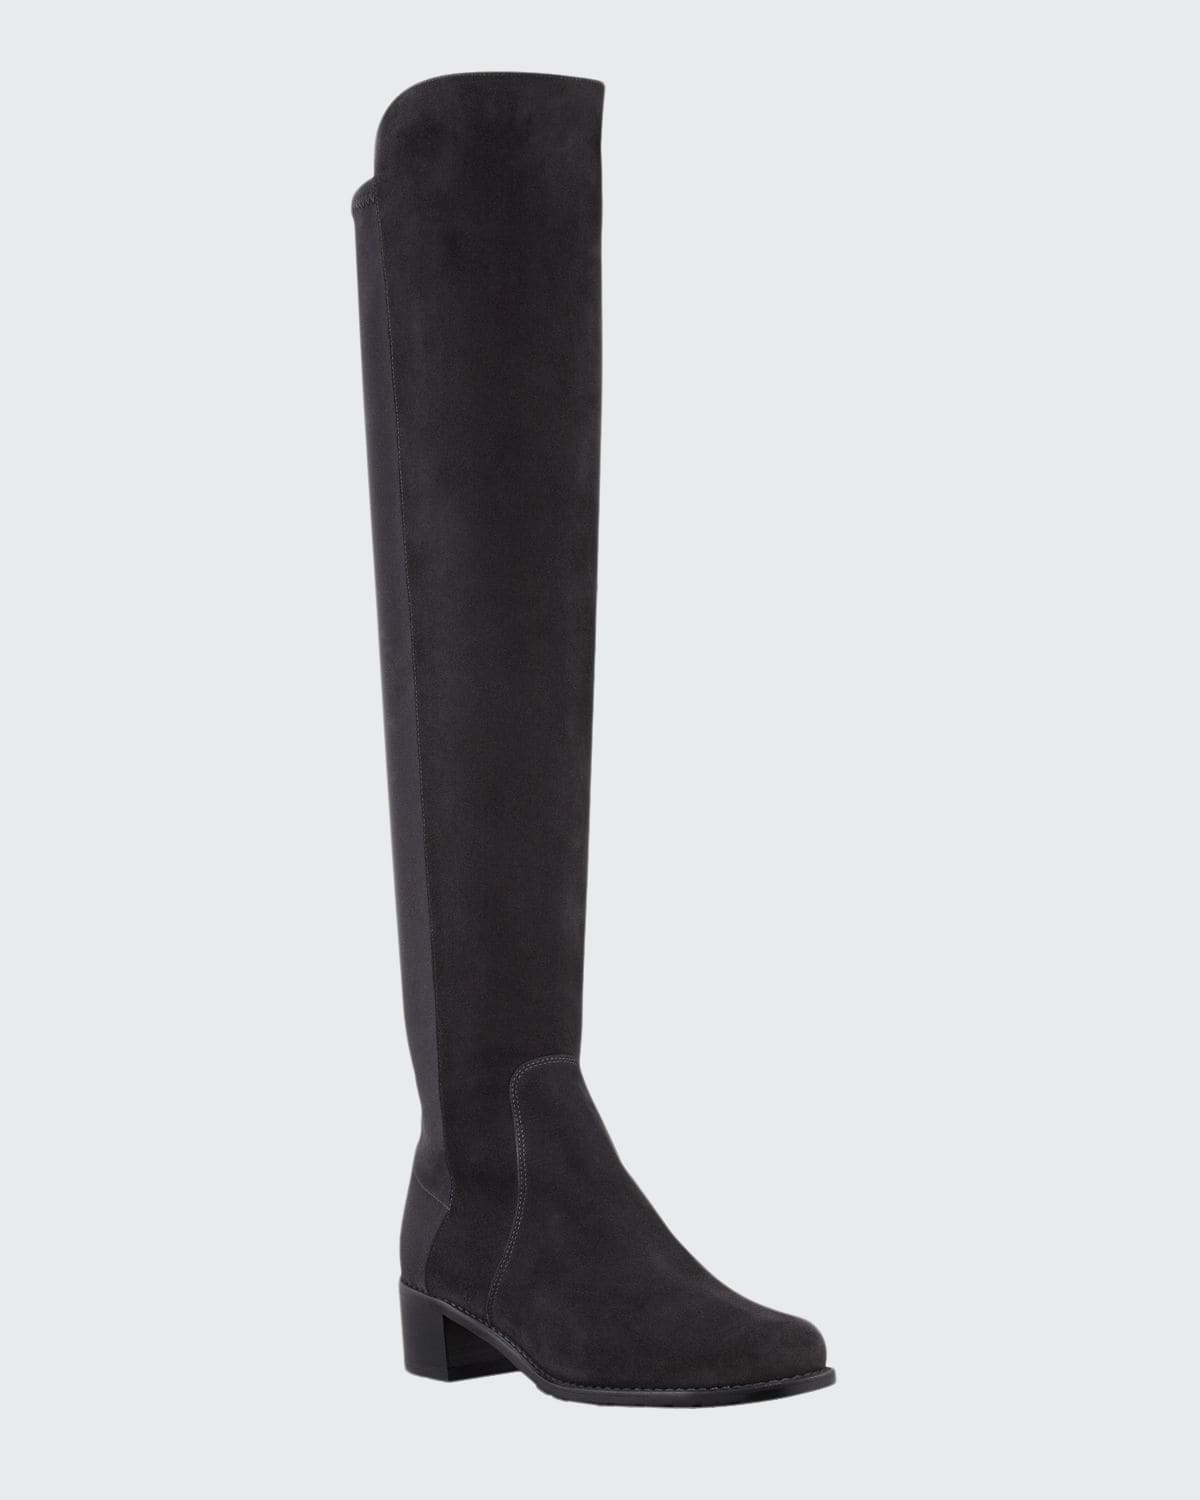 Reserve Suede Over-the-Knee Boot, Olive (Made to Order)